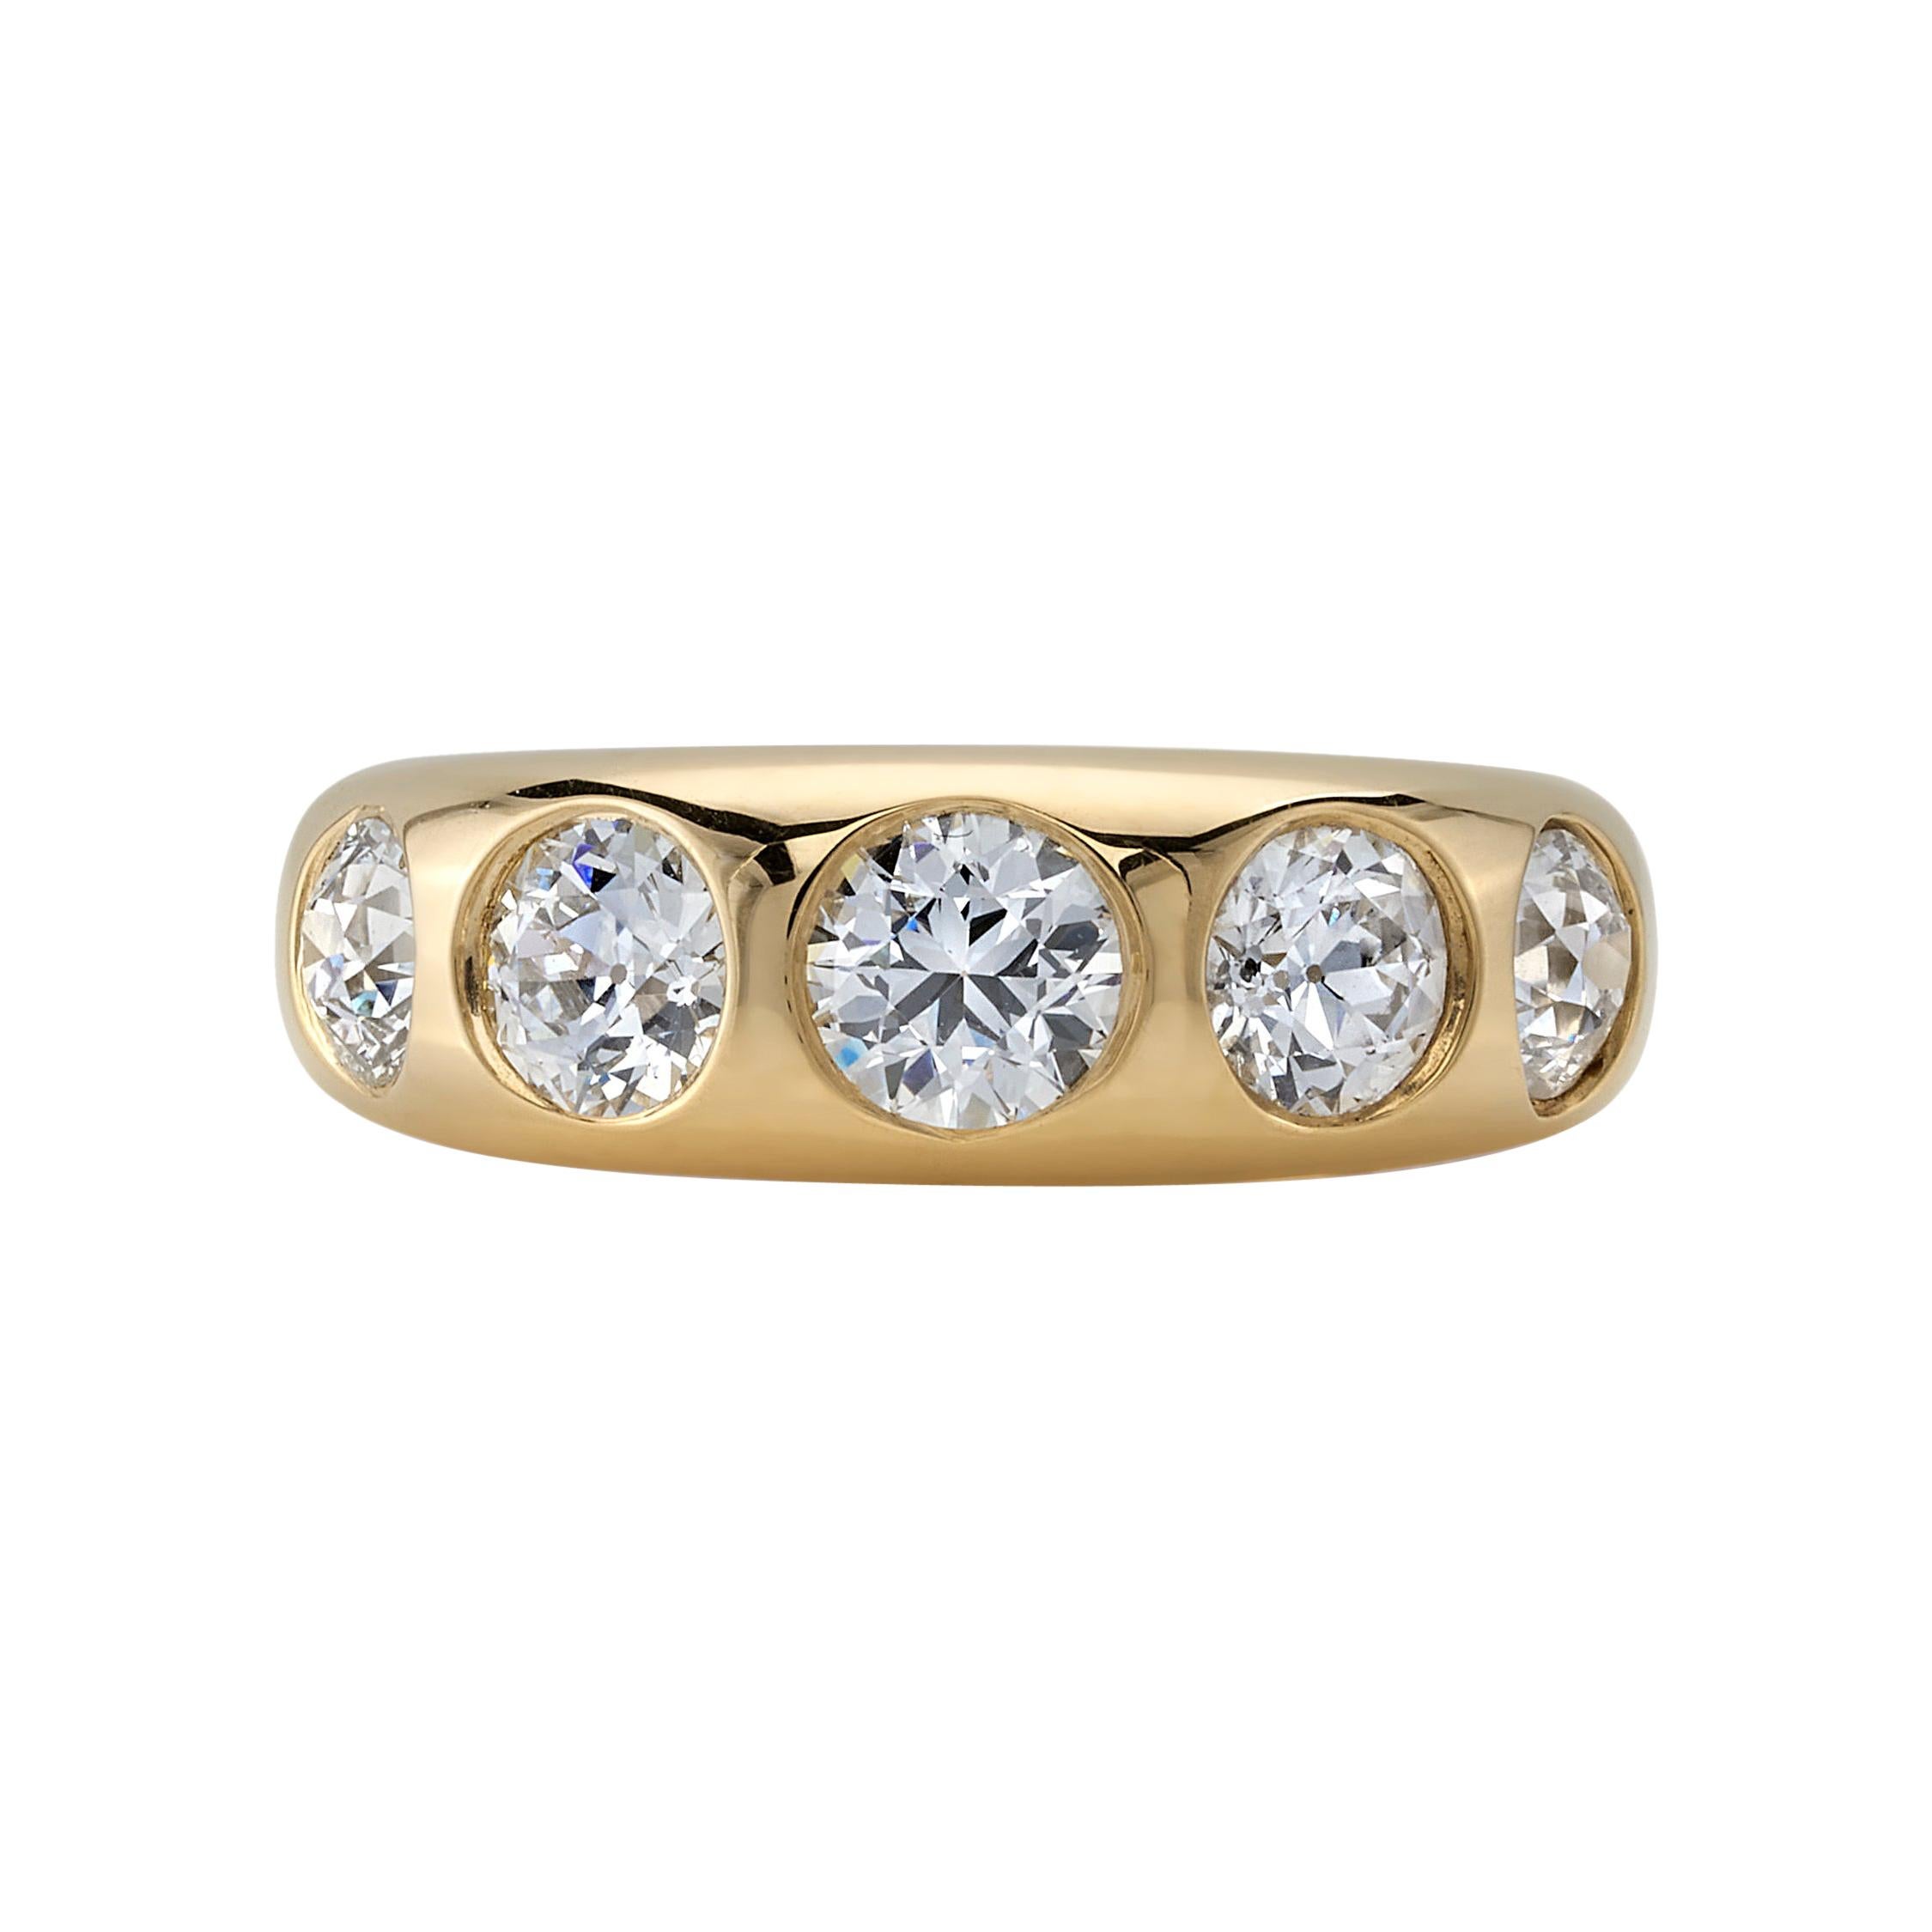 1.64 Carat Old European Cut Diamonds Set in a Handcrafted Domed Yellow Gold Band